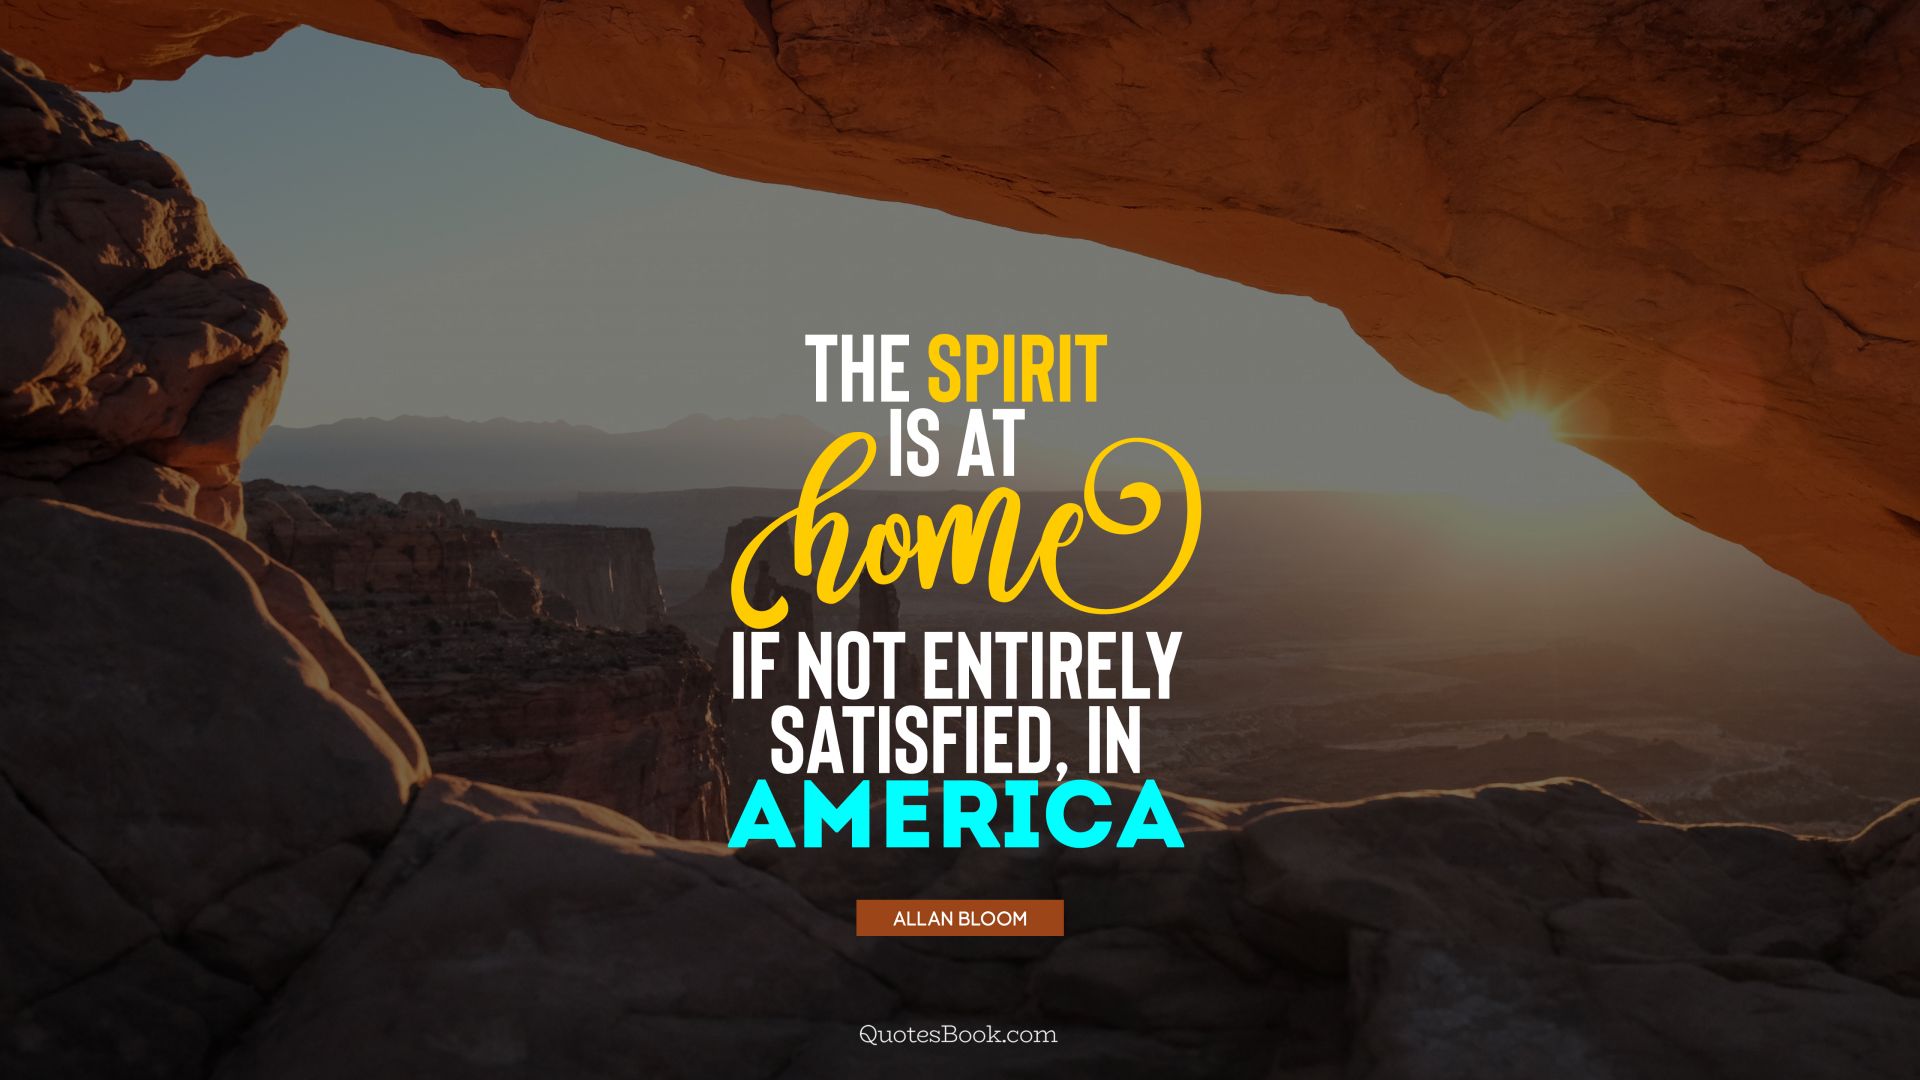 The spirit is at home, if not entirely satisfied, in America. - Quote by Allan Bloom